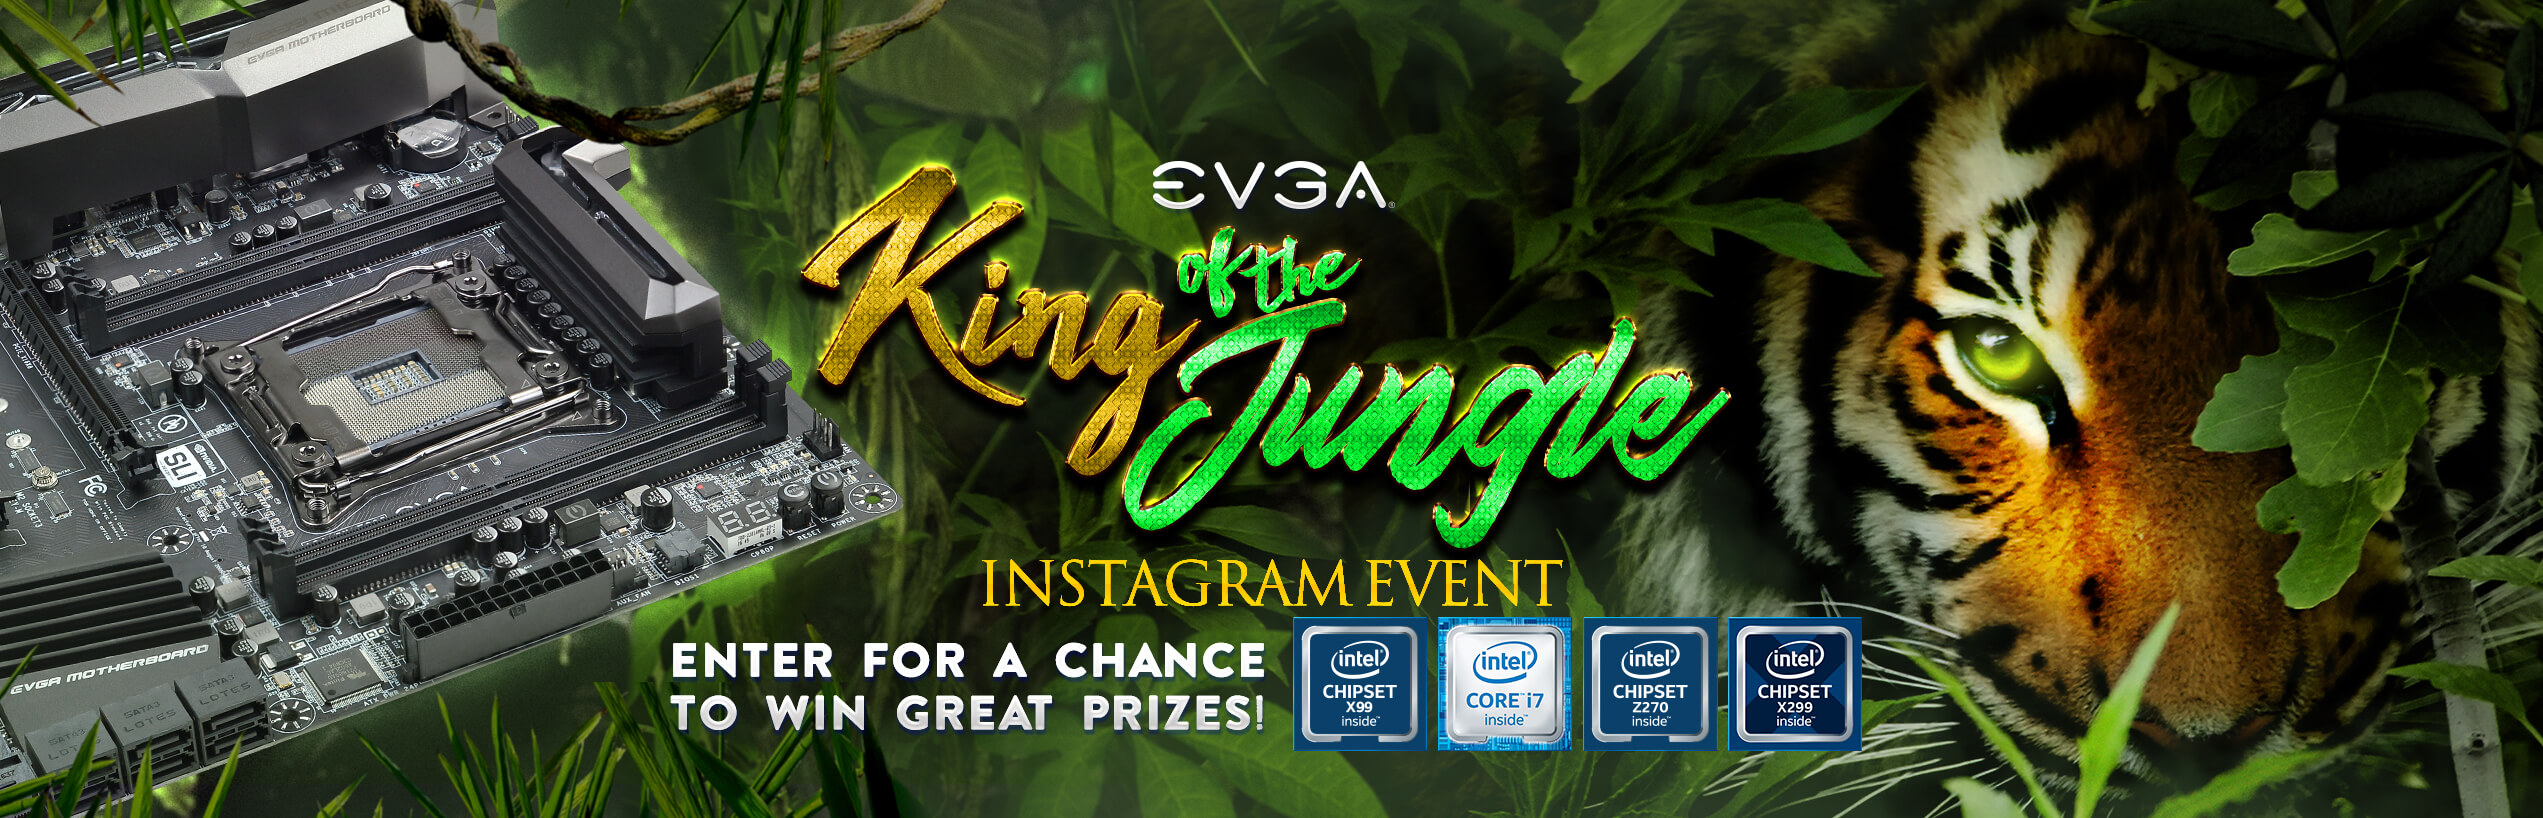 EVGA King of the Jungle Instagram Event